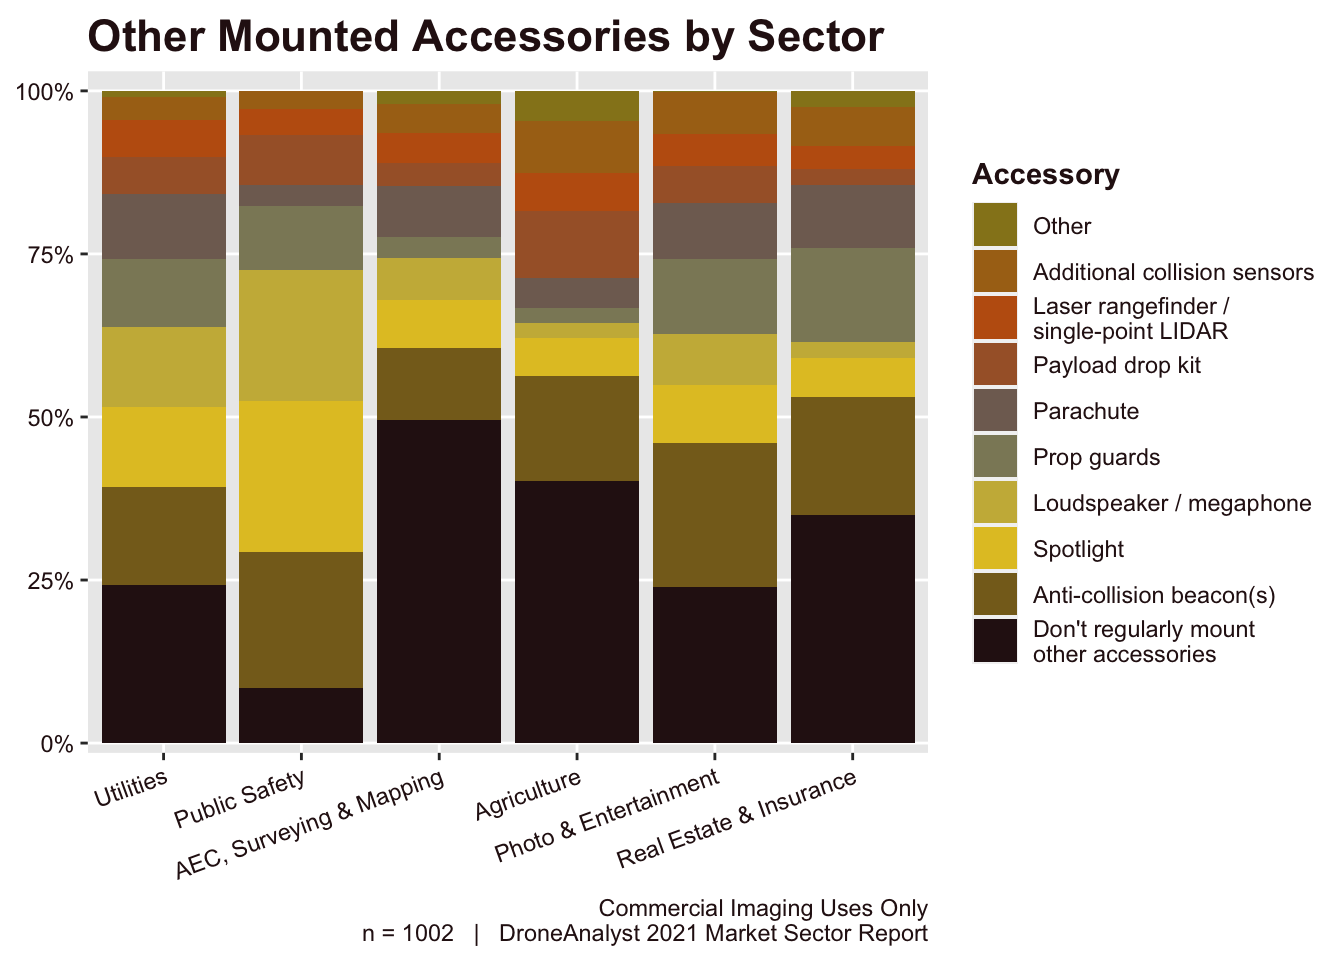 Other Mounted Accessories by Sector